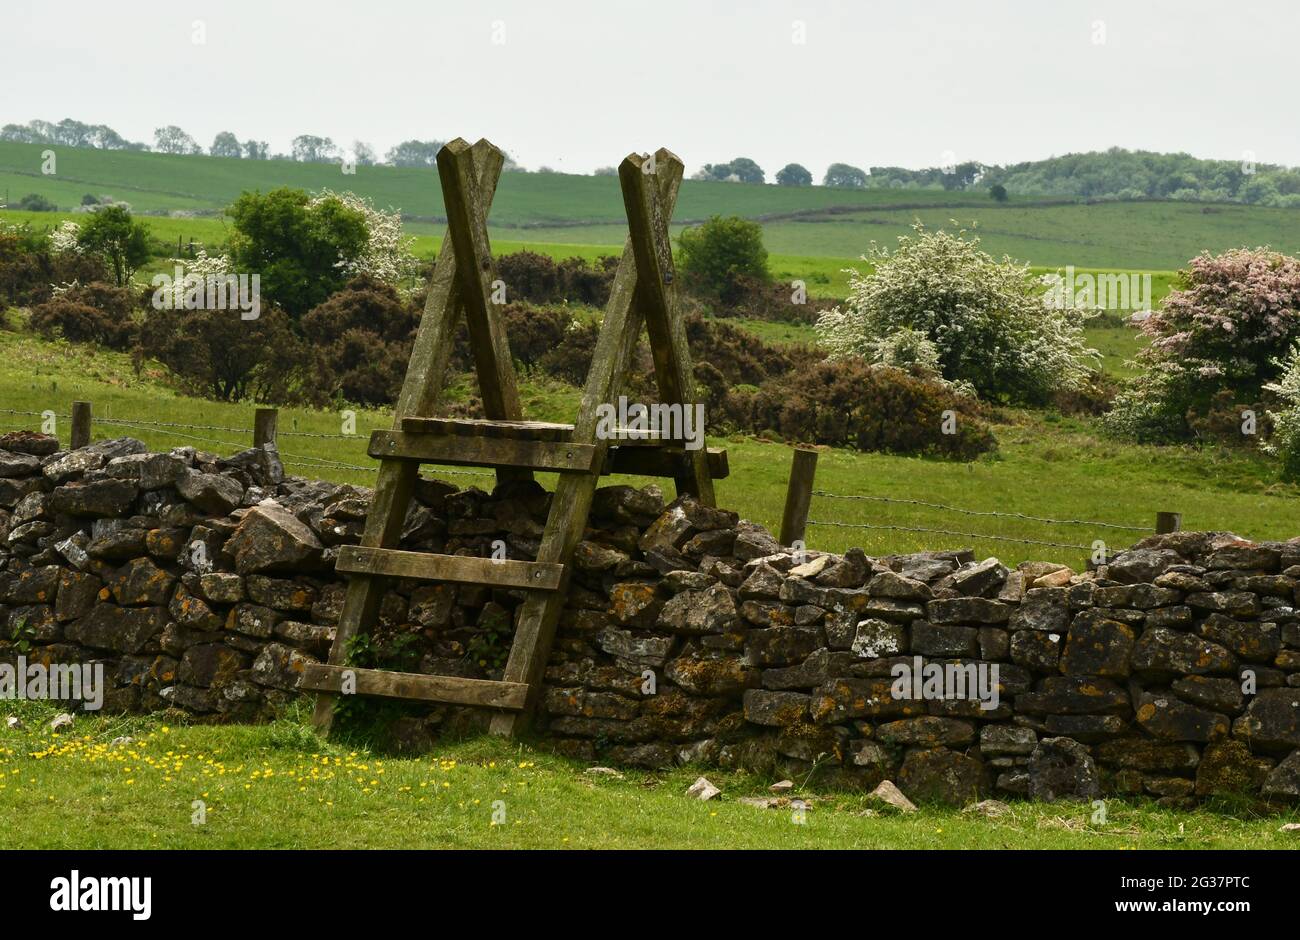 Wooden stile over a dry stone wall in the Ubley Warren nature reserve on the Mendip Hills in Somerset UL Stock Photo